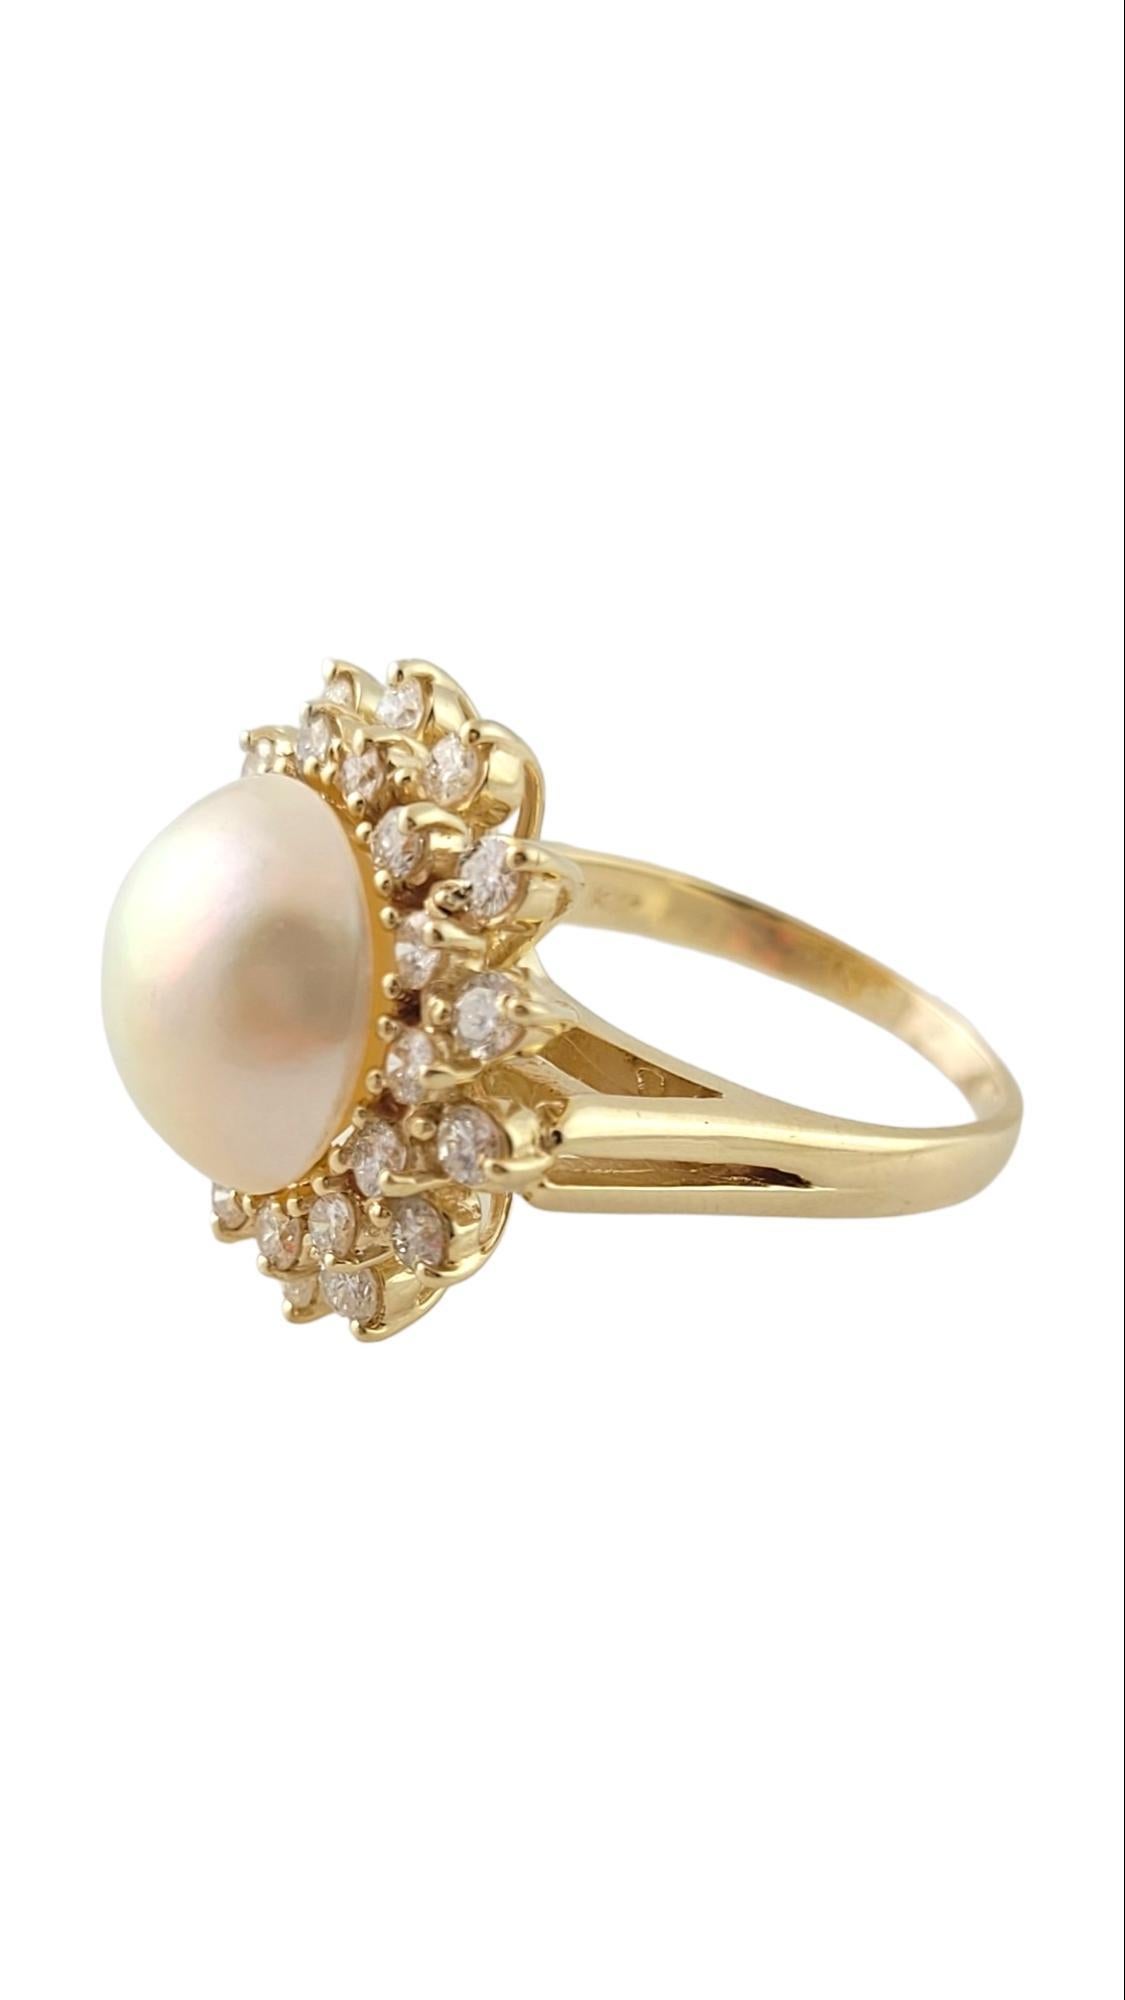 14 Karat Yellow Gold Cultured Mabe Pearl and Diamond Ring Size 8.25-

This stunning ring features one round Mabe pearl (14 mm) surrounded by 28 round brilliant cut diamonds set in classic 14K yellow gold. Width: 21 mm. Shank: 2 mm.

Total diamond